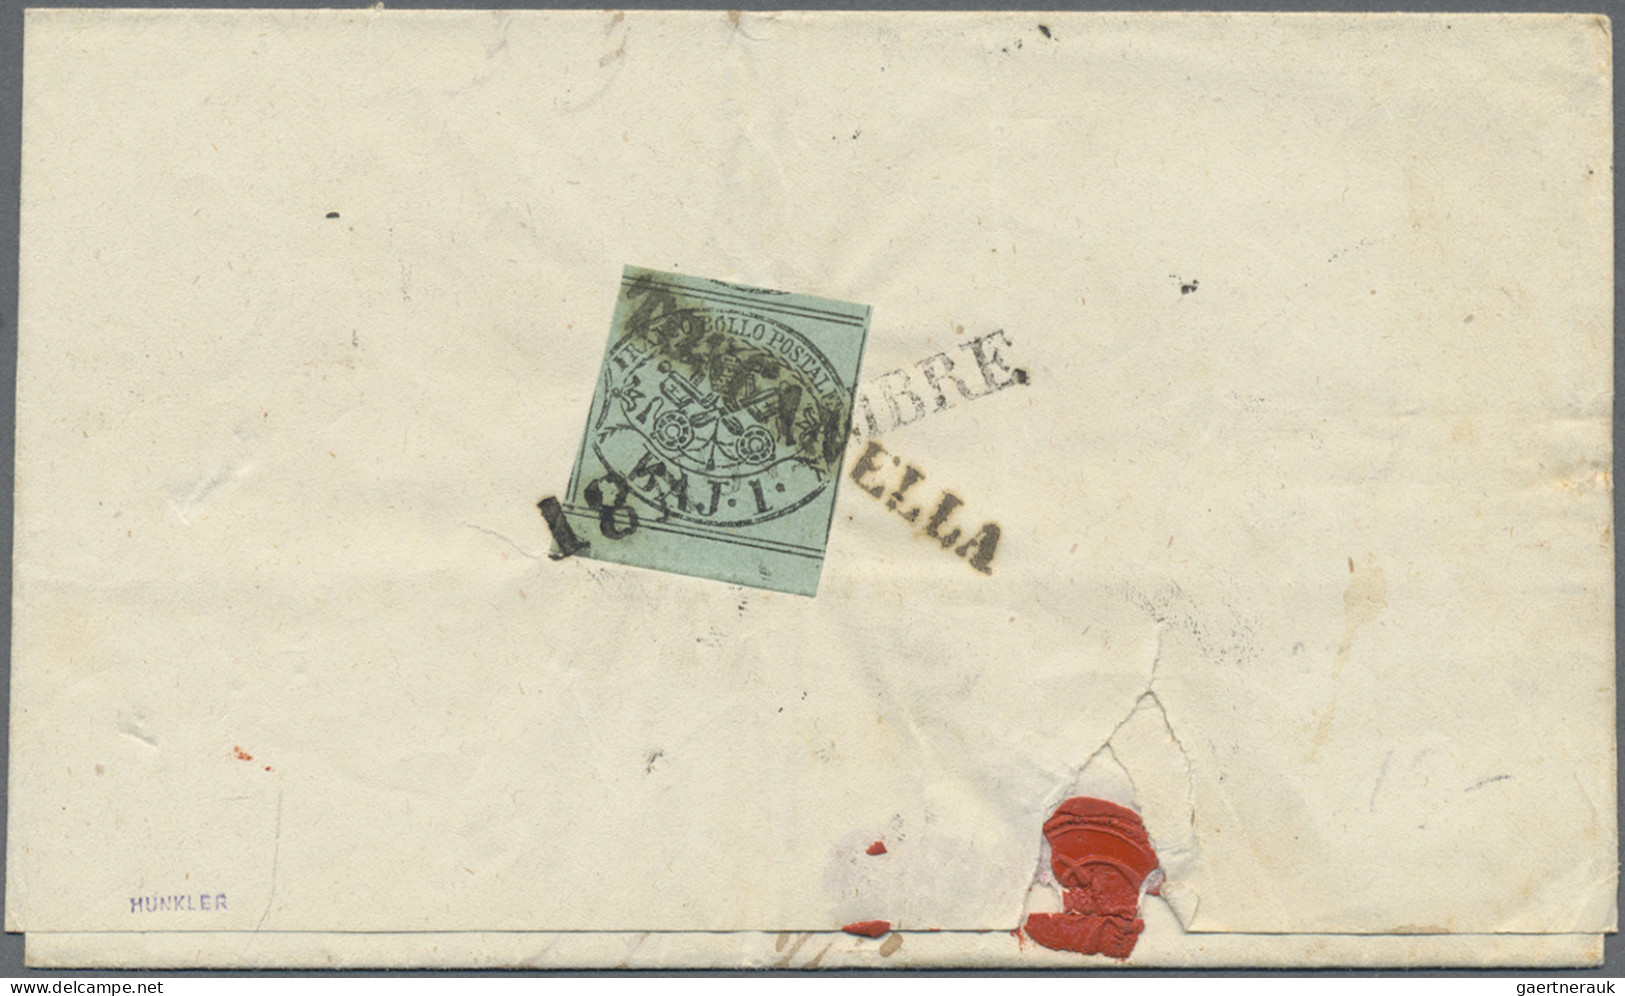 Italian States - Papal State: 1852, four covers from the first issue: a) 5 baj r